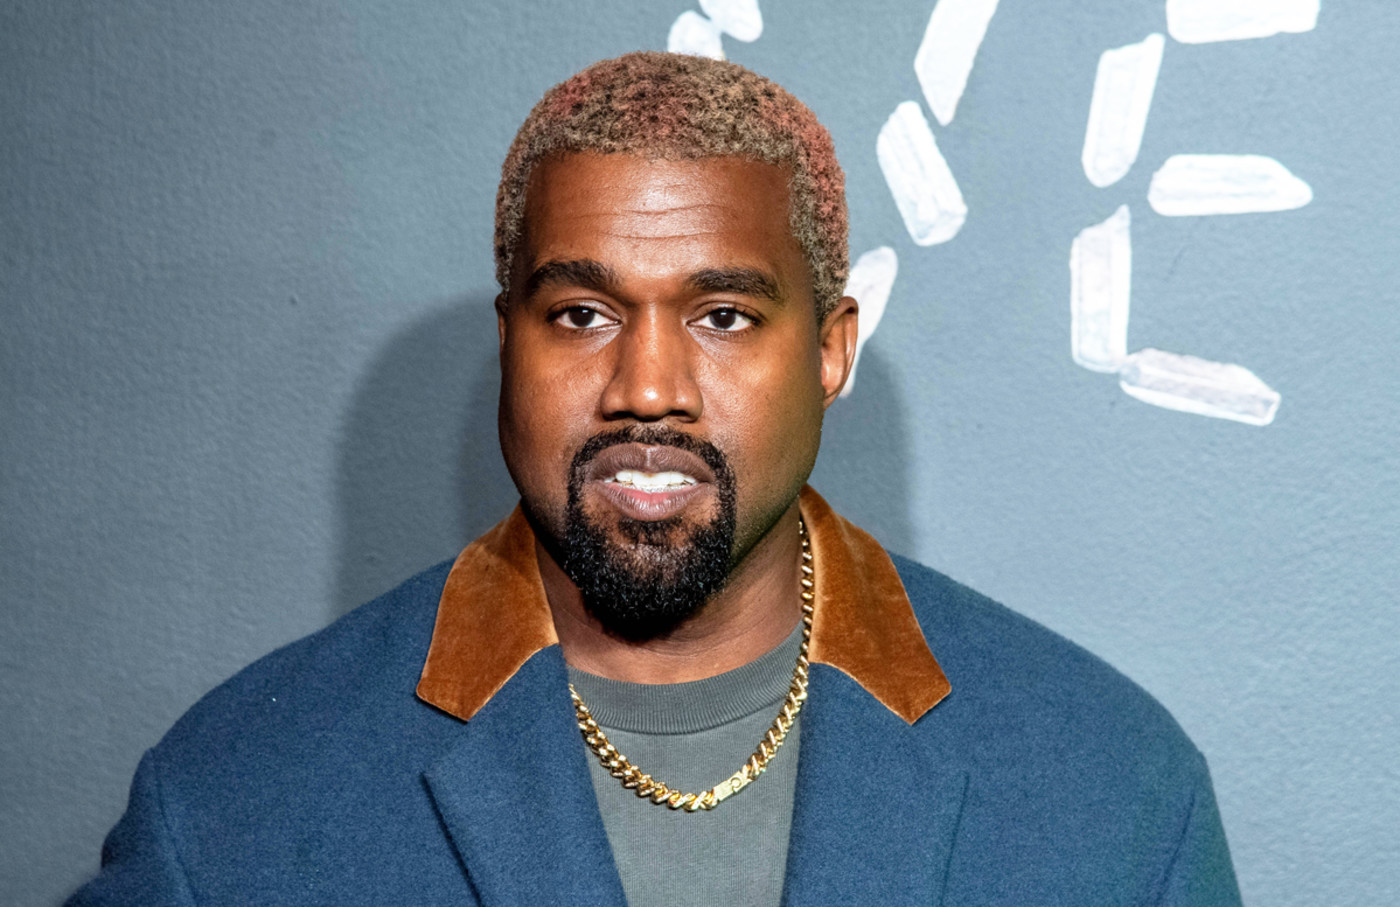 Kanye West Is the Most Streamed Artist on Spotify